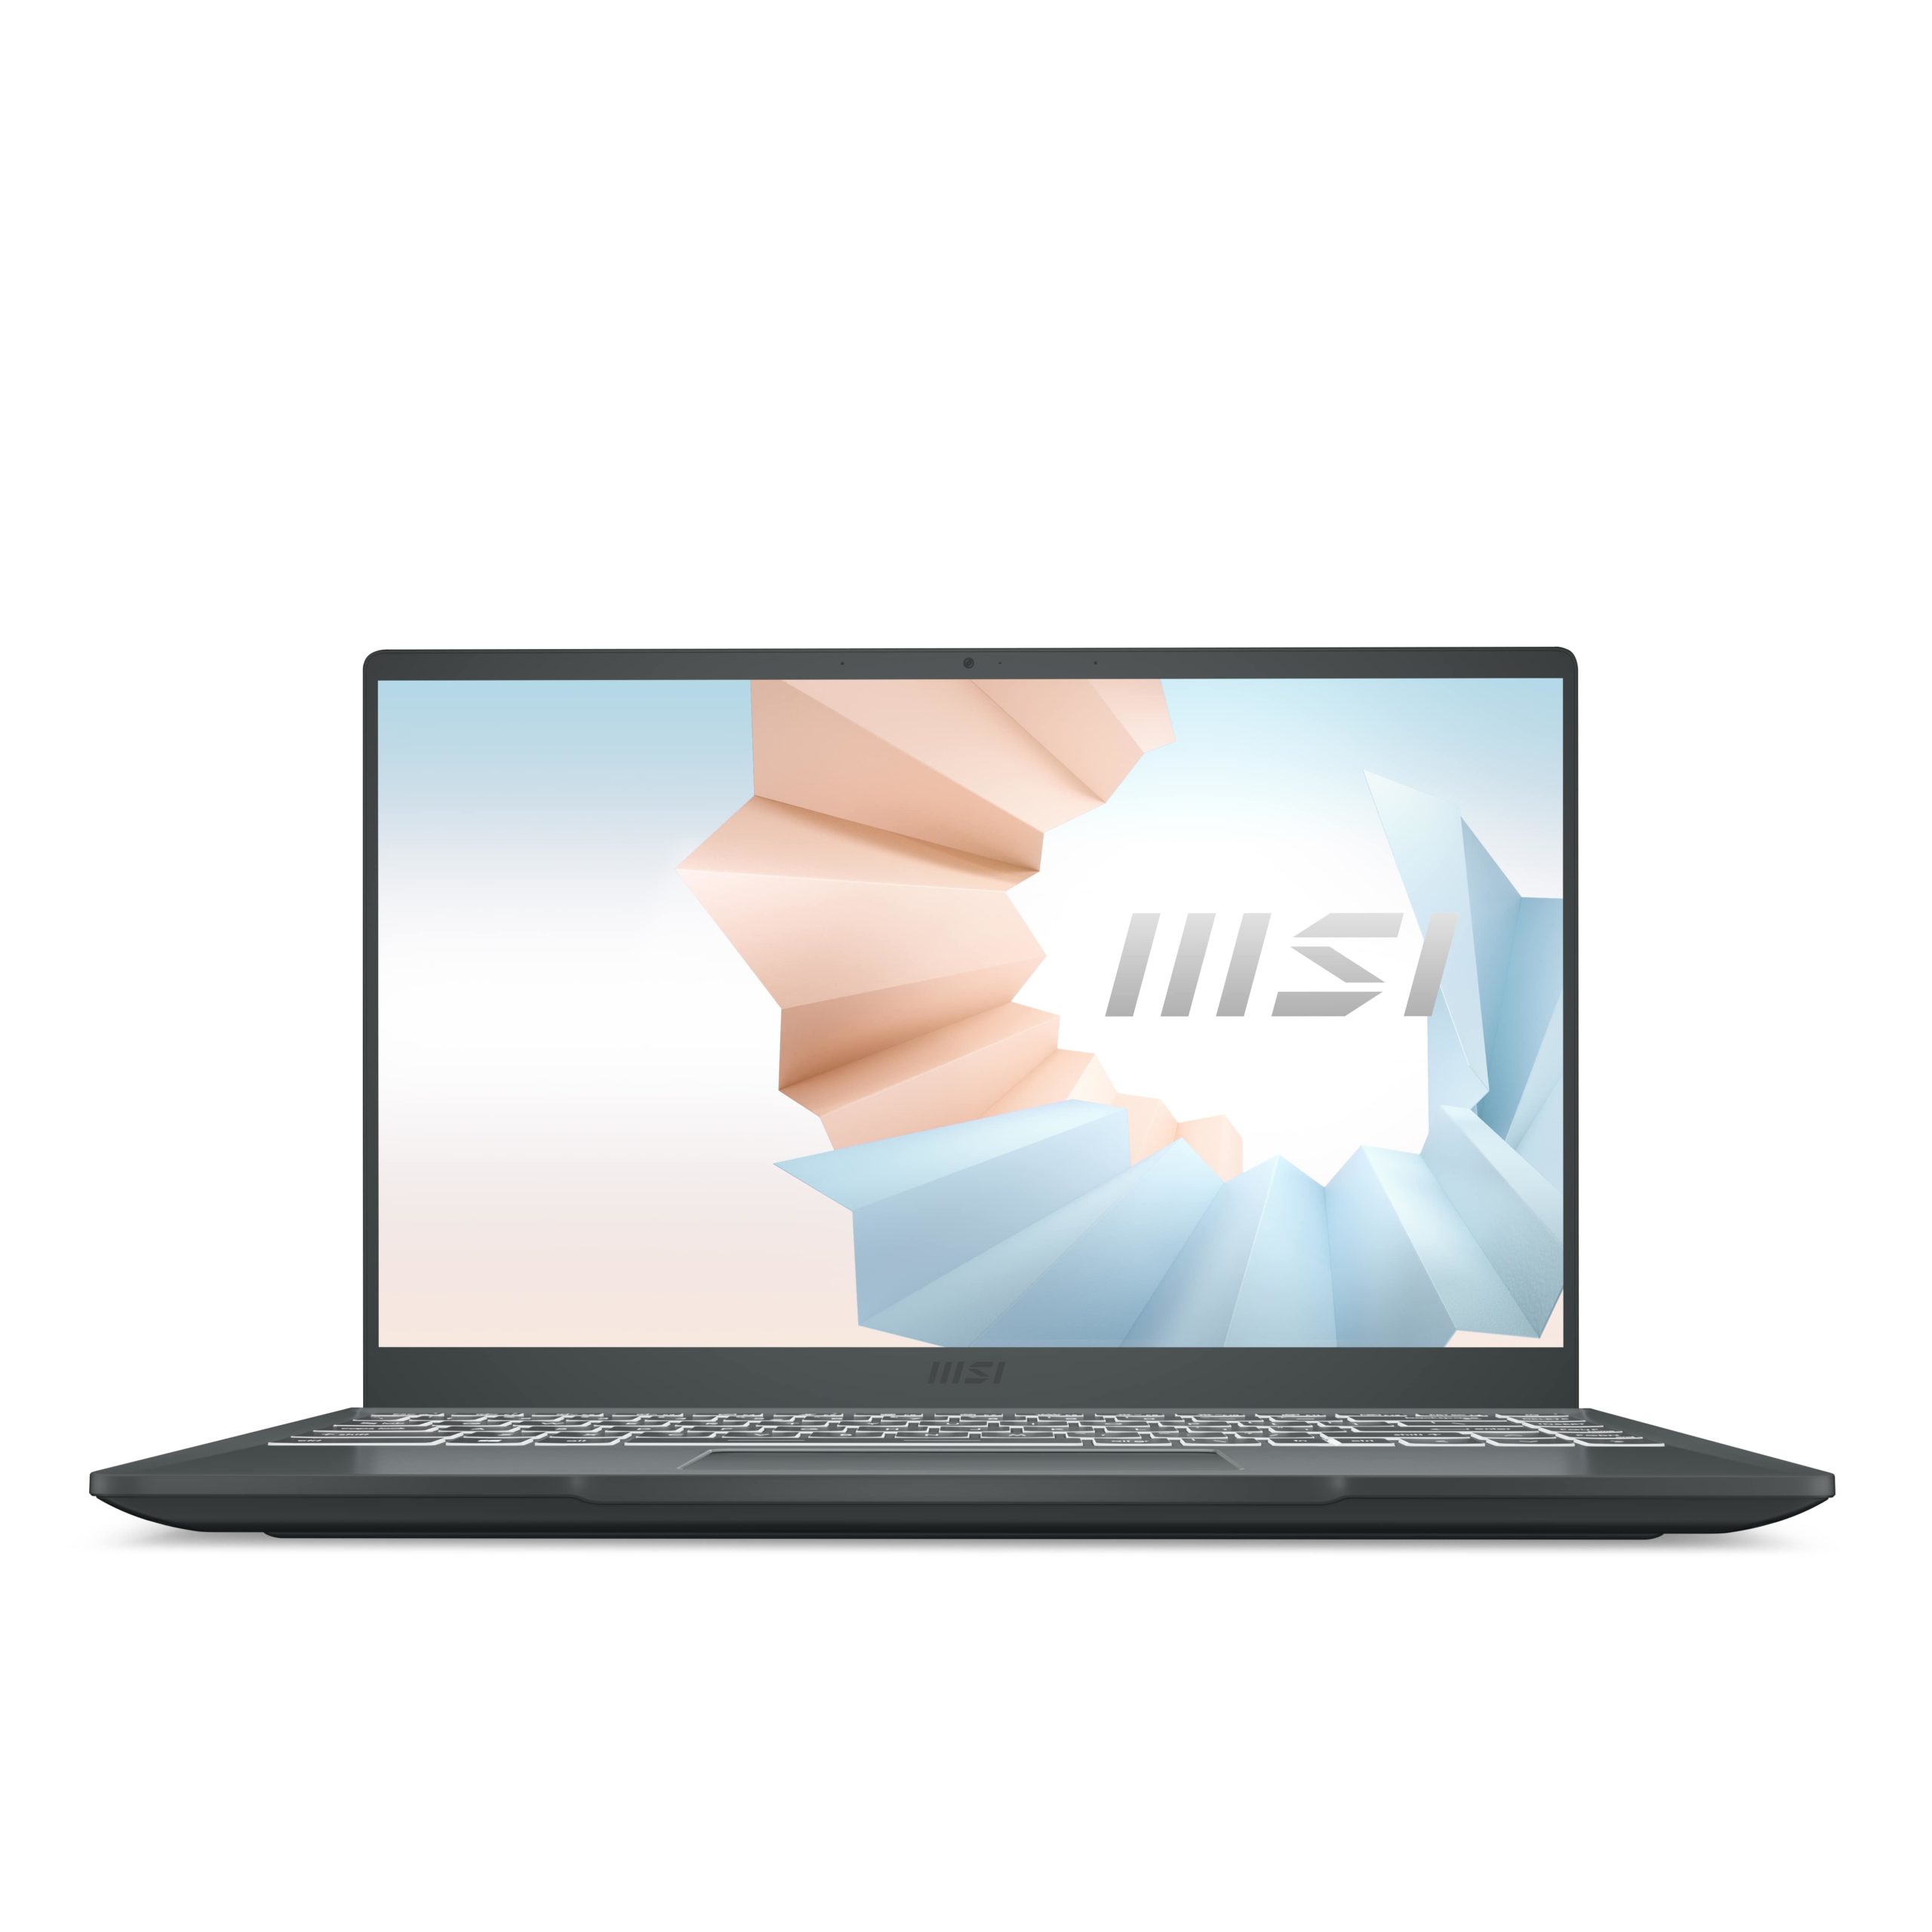 MSI launches new laptops for their Business and Productivity lineup